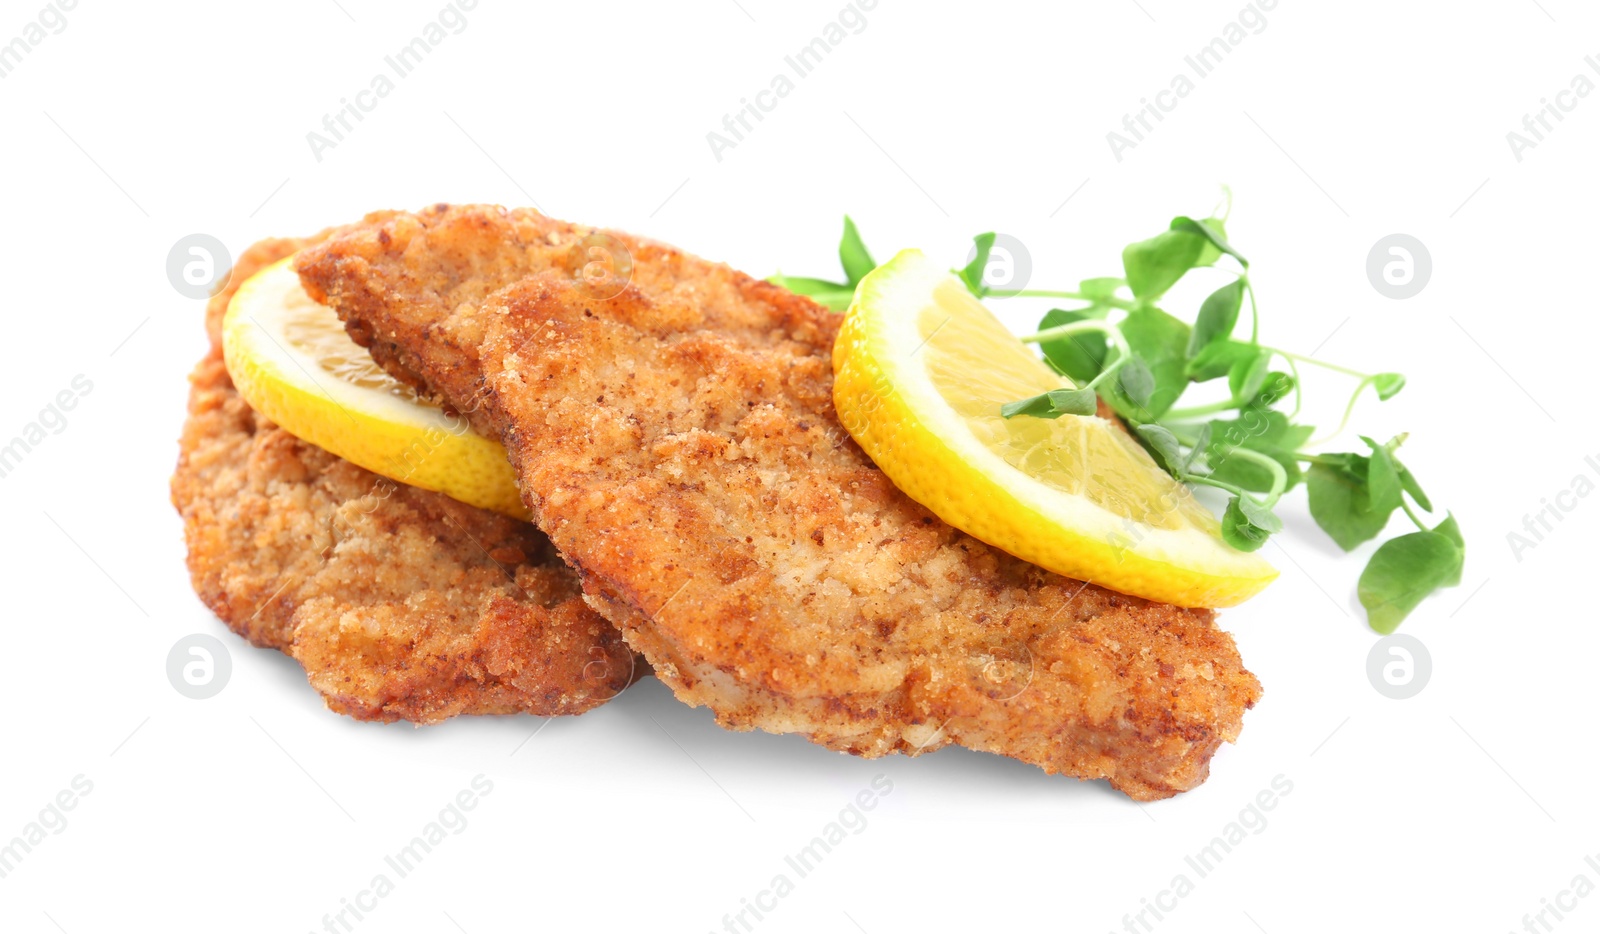 Photo of Delicious schnitzels with lemon and microgreens on white background